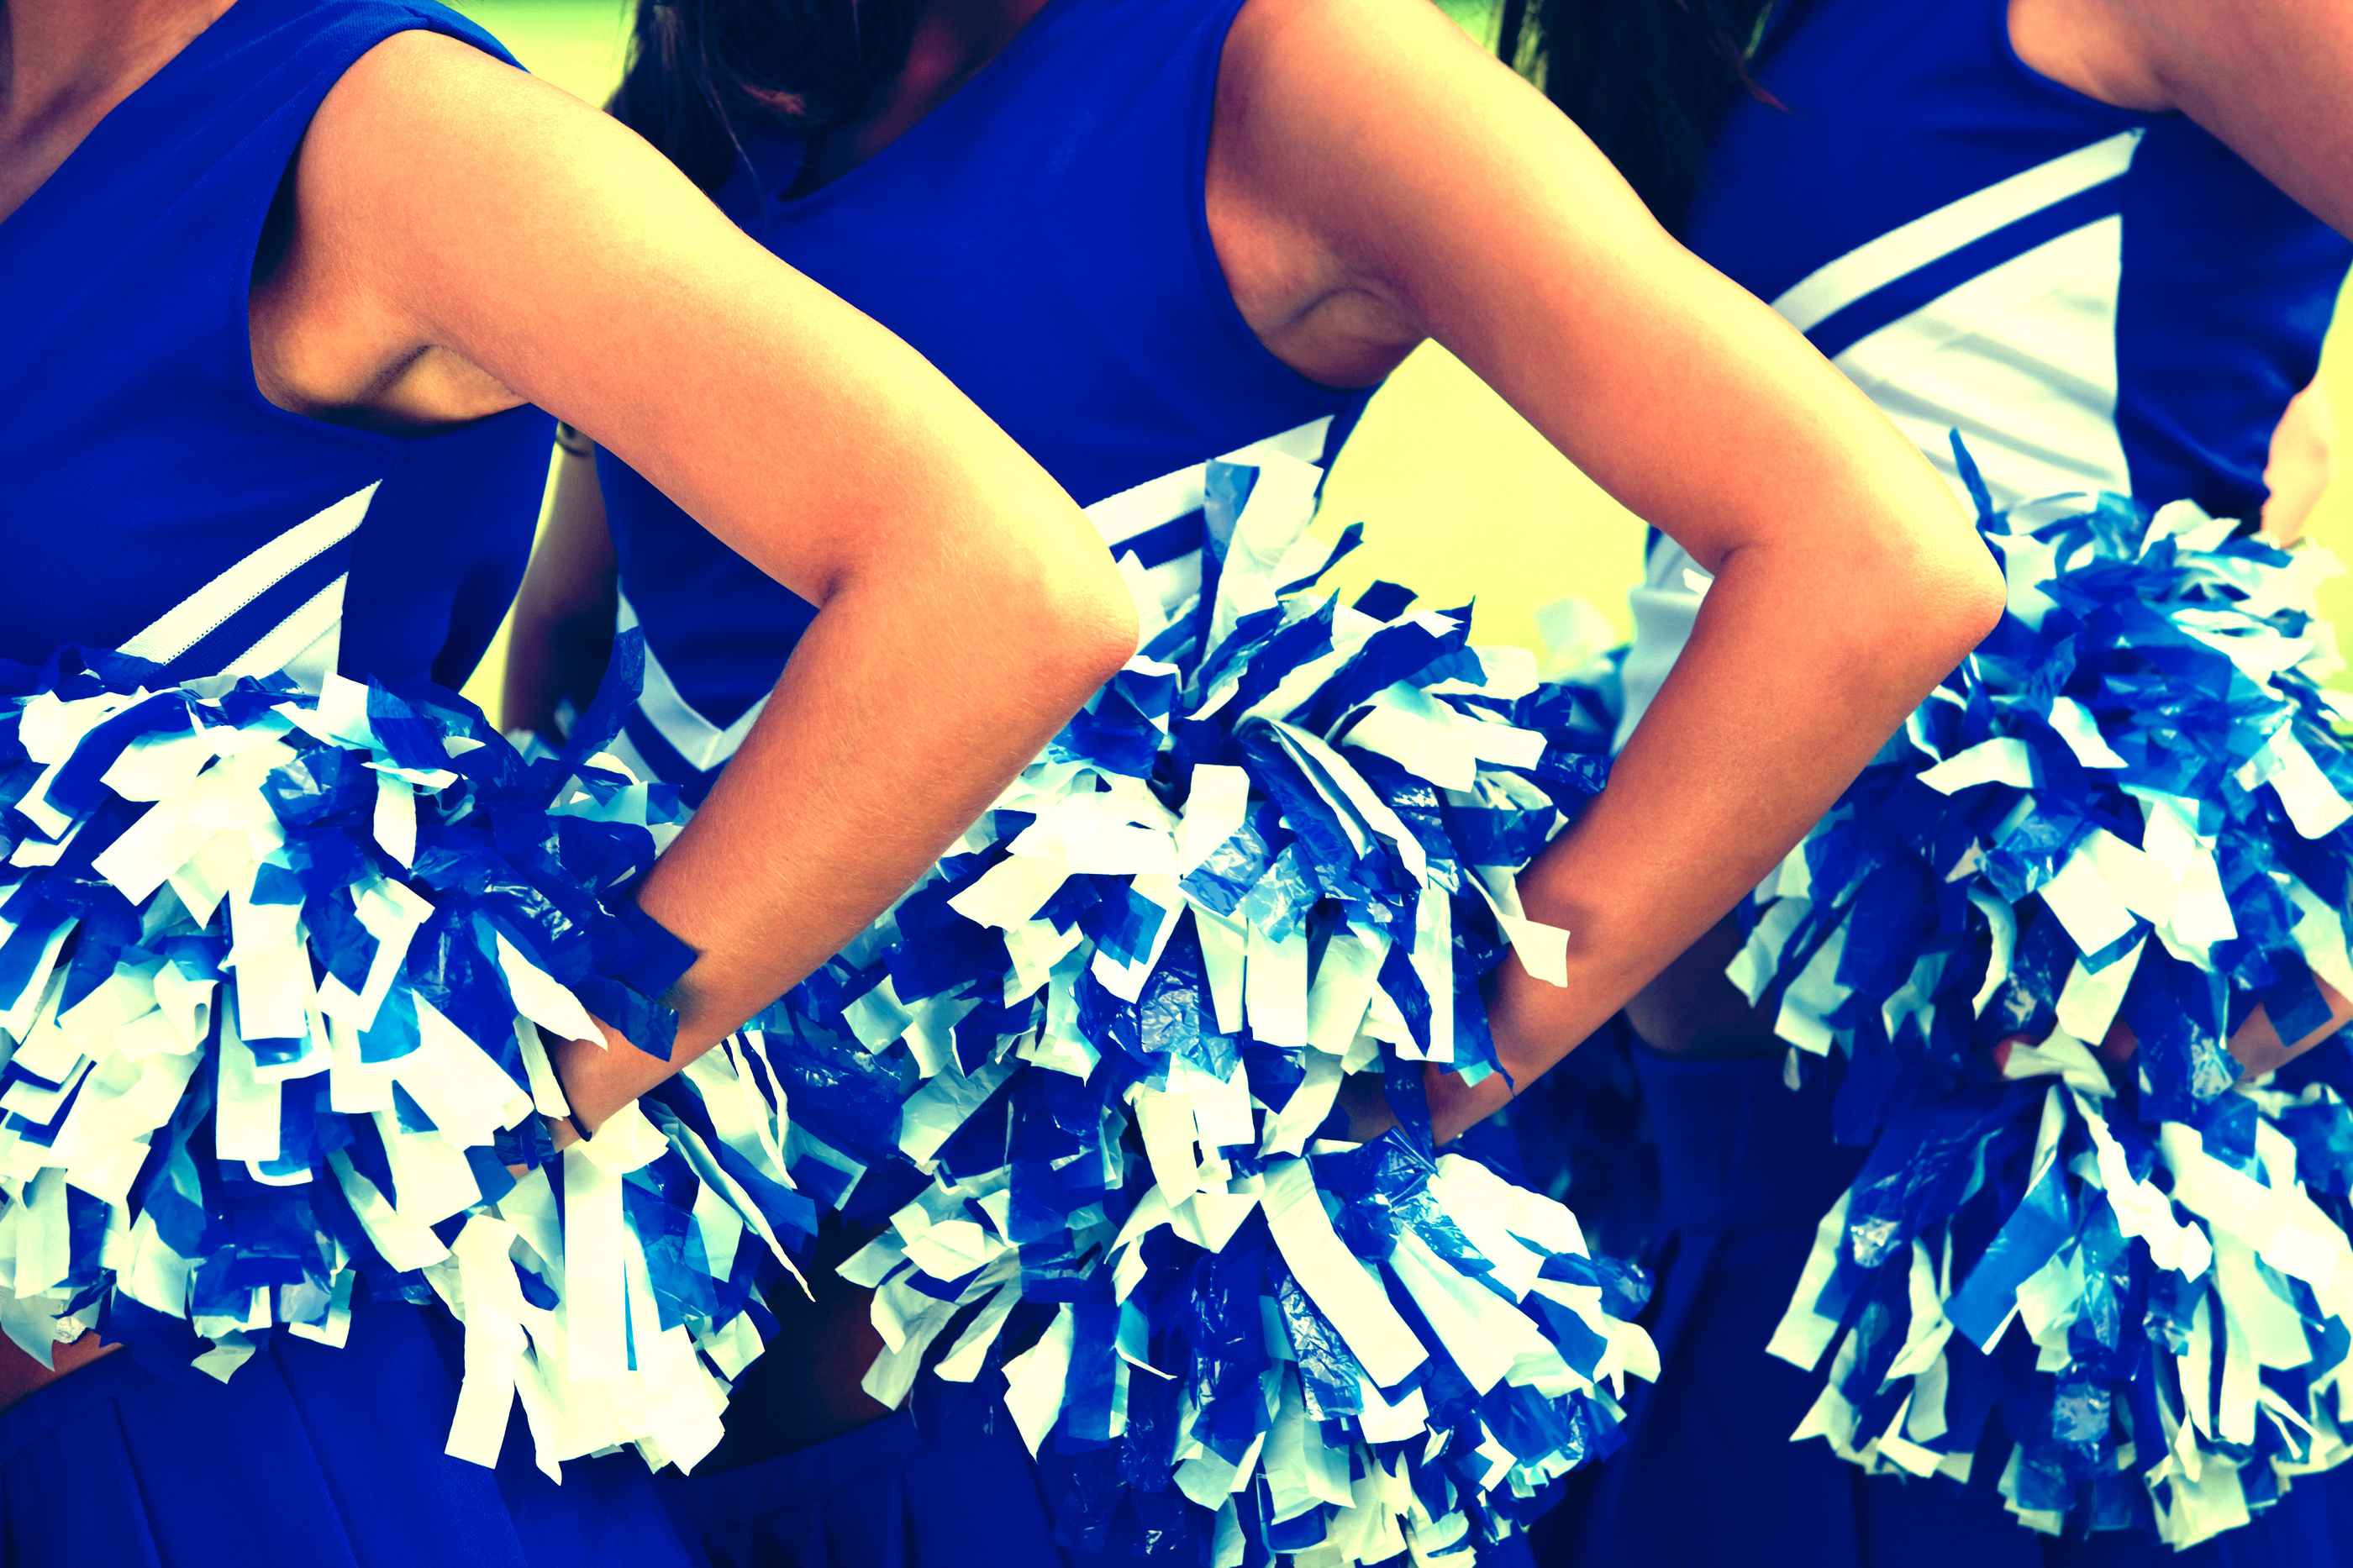 Cheerleaders and Pom-poms